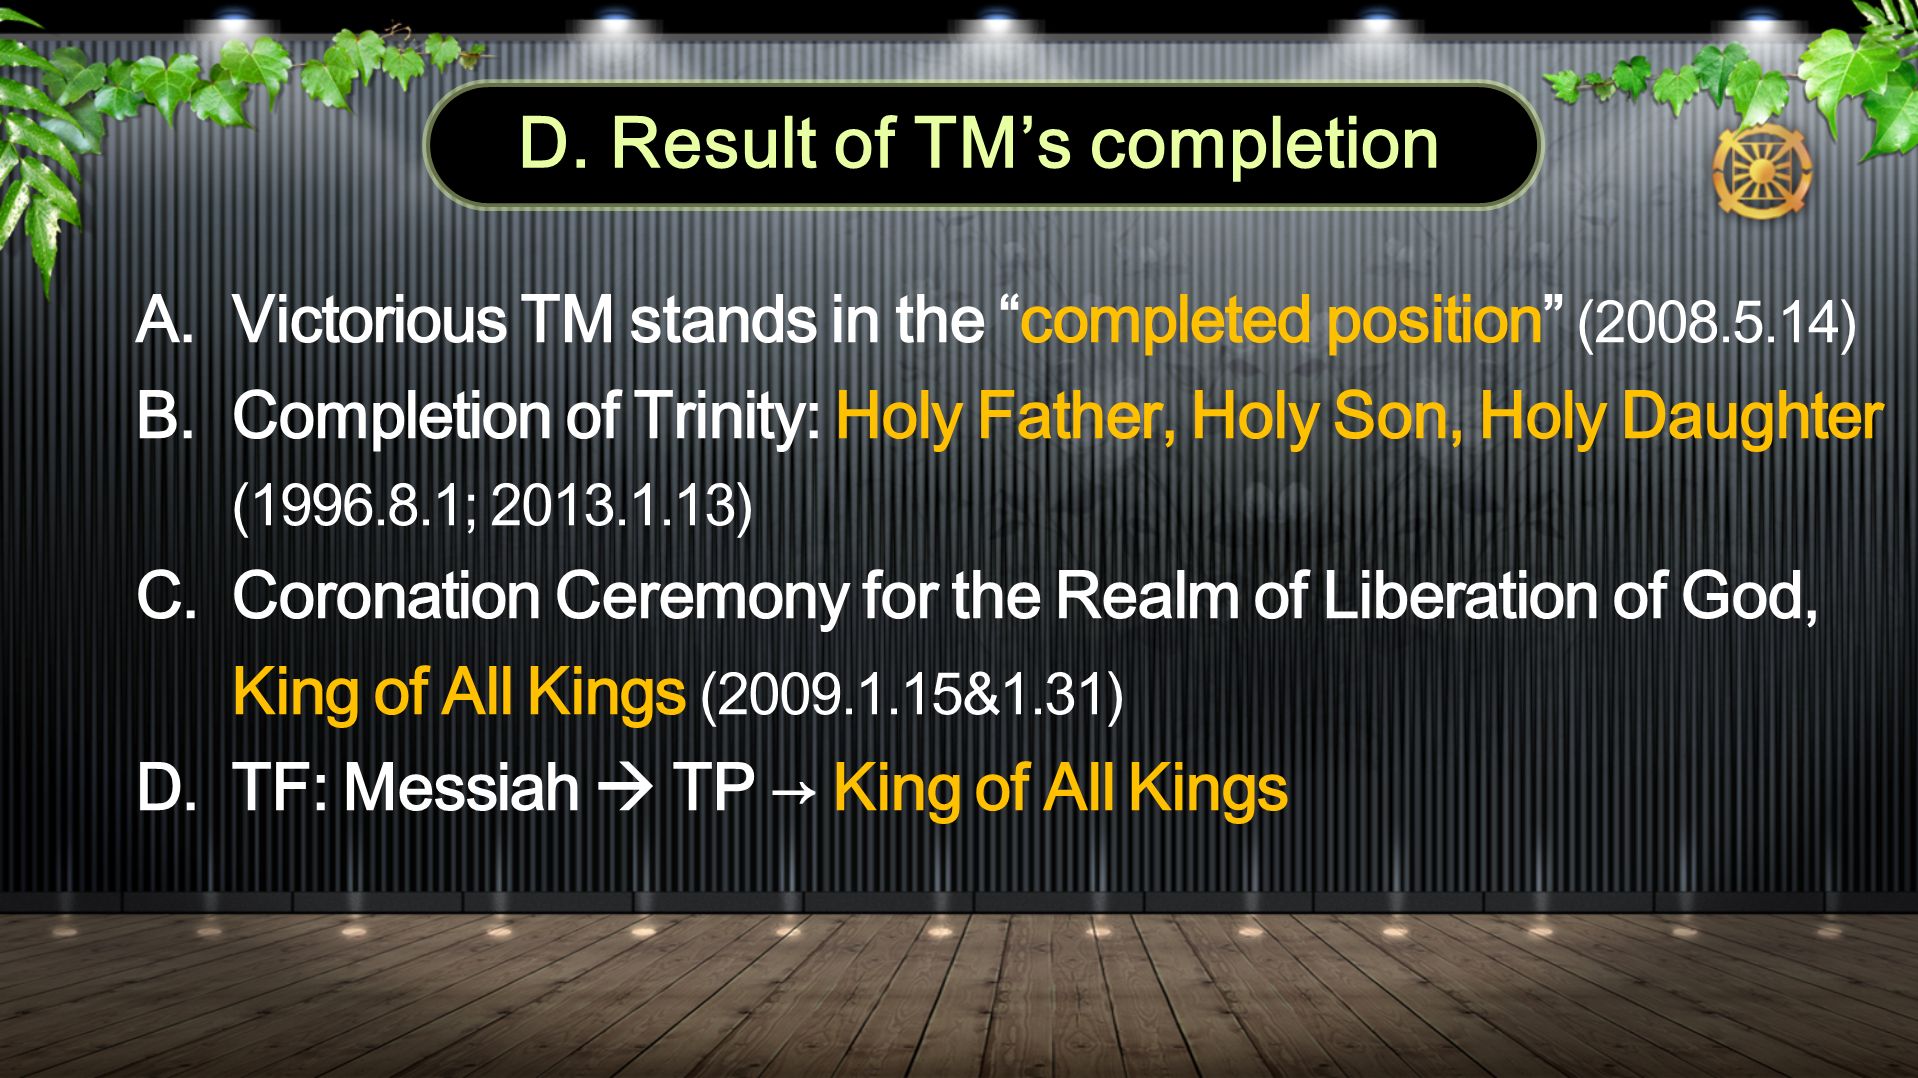 A.Victorious TM stands in the completed position ( ) B.Completion of Trinity: Holy Father, Holy Son, Holy Daughter ( ; ) C.Coronation Ceremony for the Realm of Liberation of God, King of All Kings ( &1.31) D.TF: Messiah  TP → King of All Kings D.